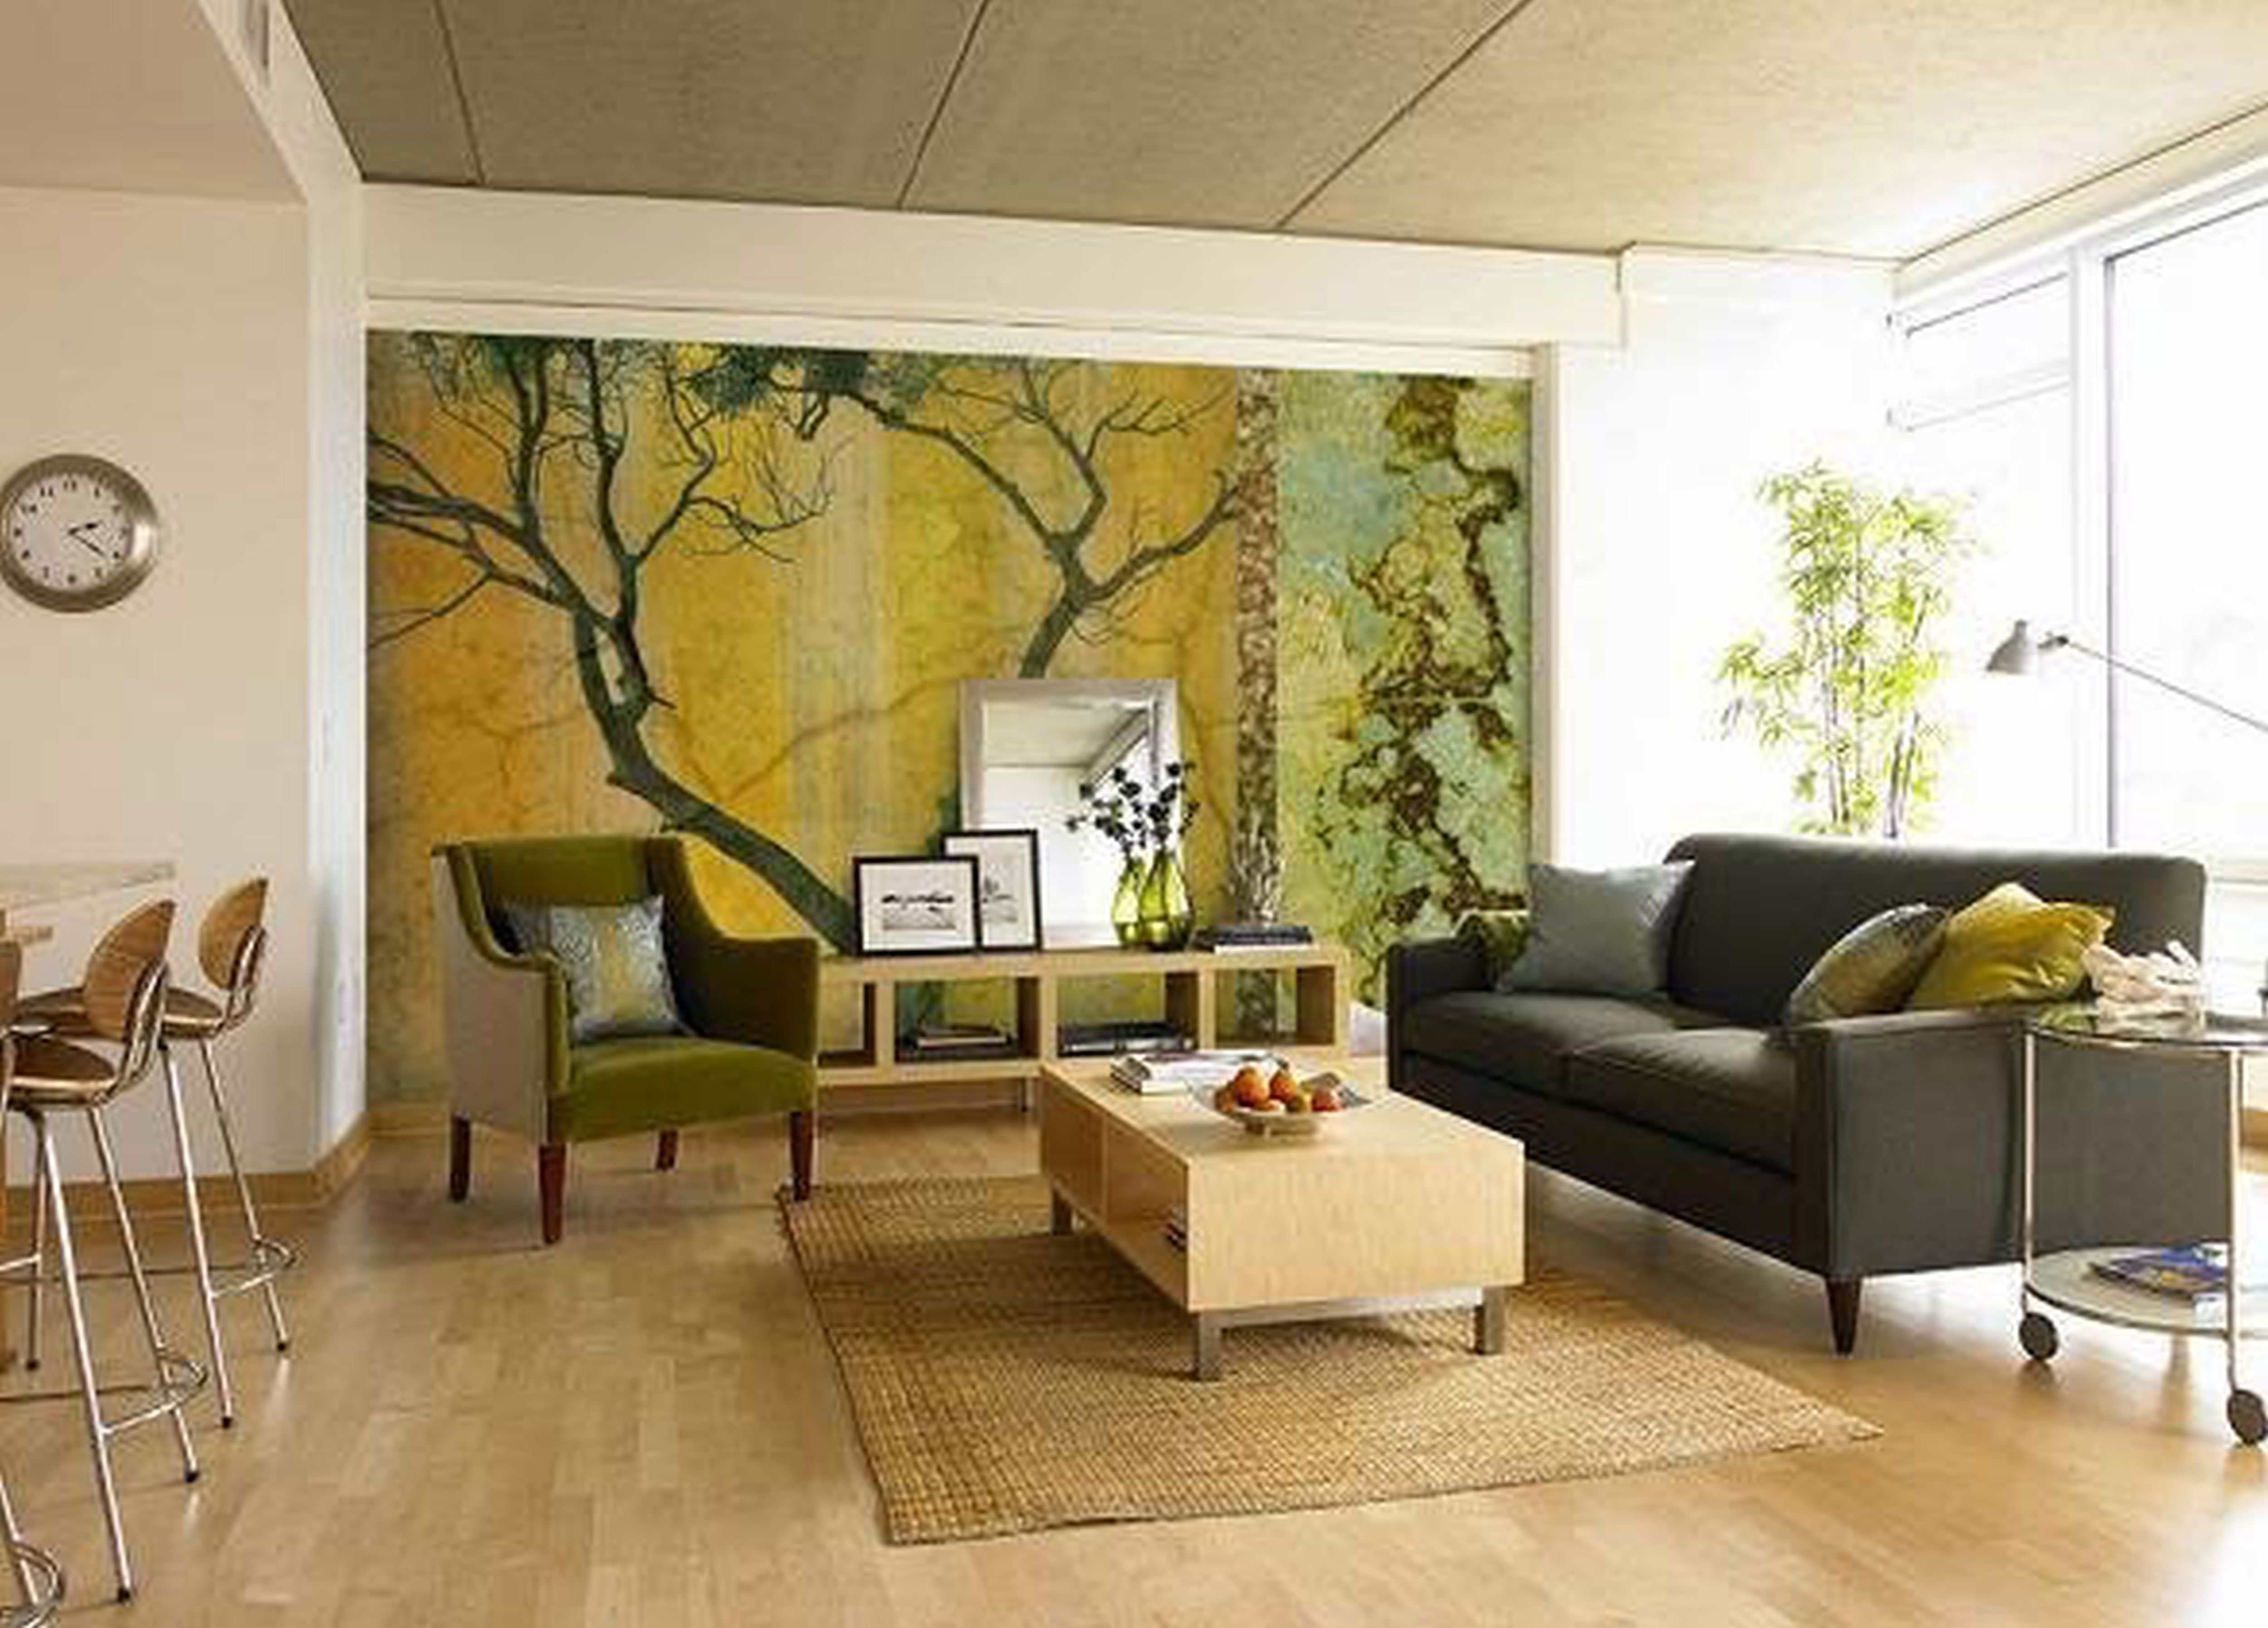 Living Room Decorating Ideas Pinterest With Wooden - Mural In Living Room - HD Wallpaper 